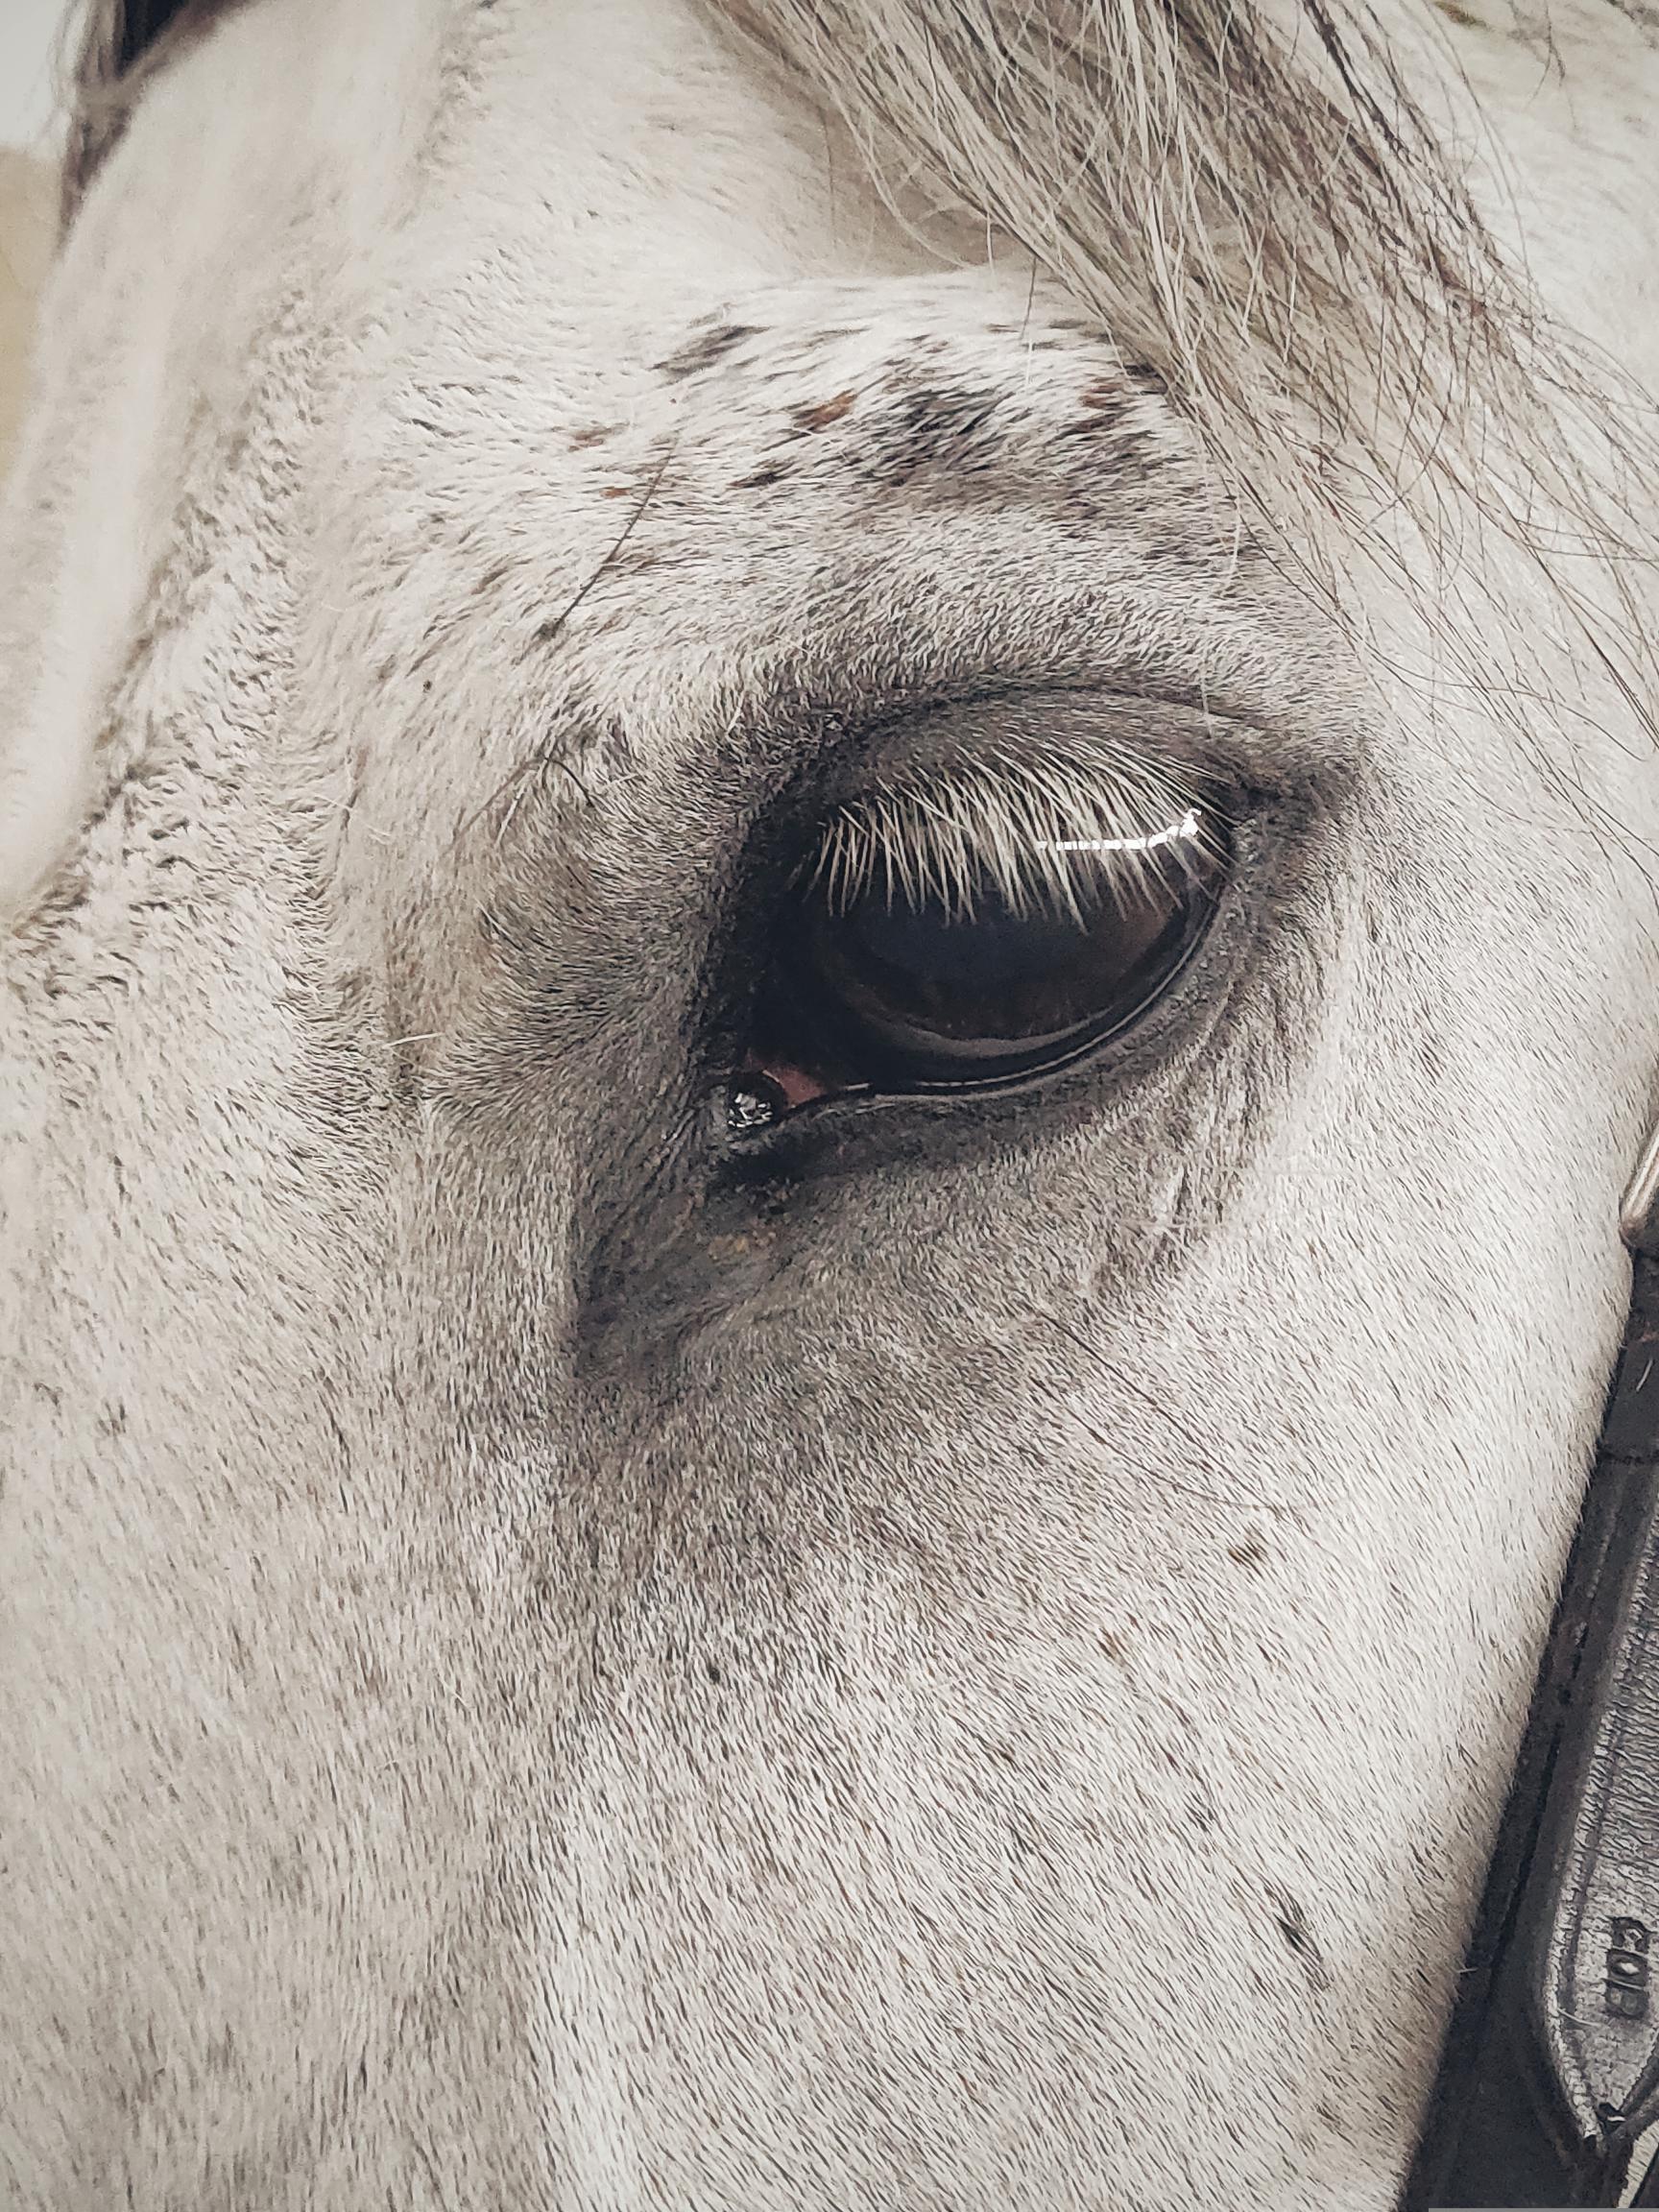 Anatomy of the horse eye: examining the structure of the equine eye